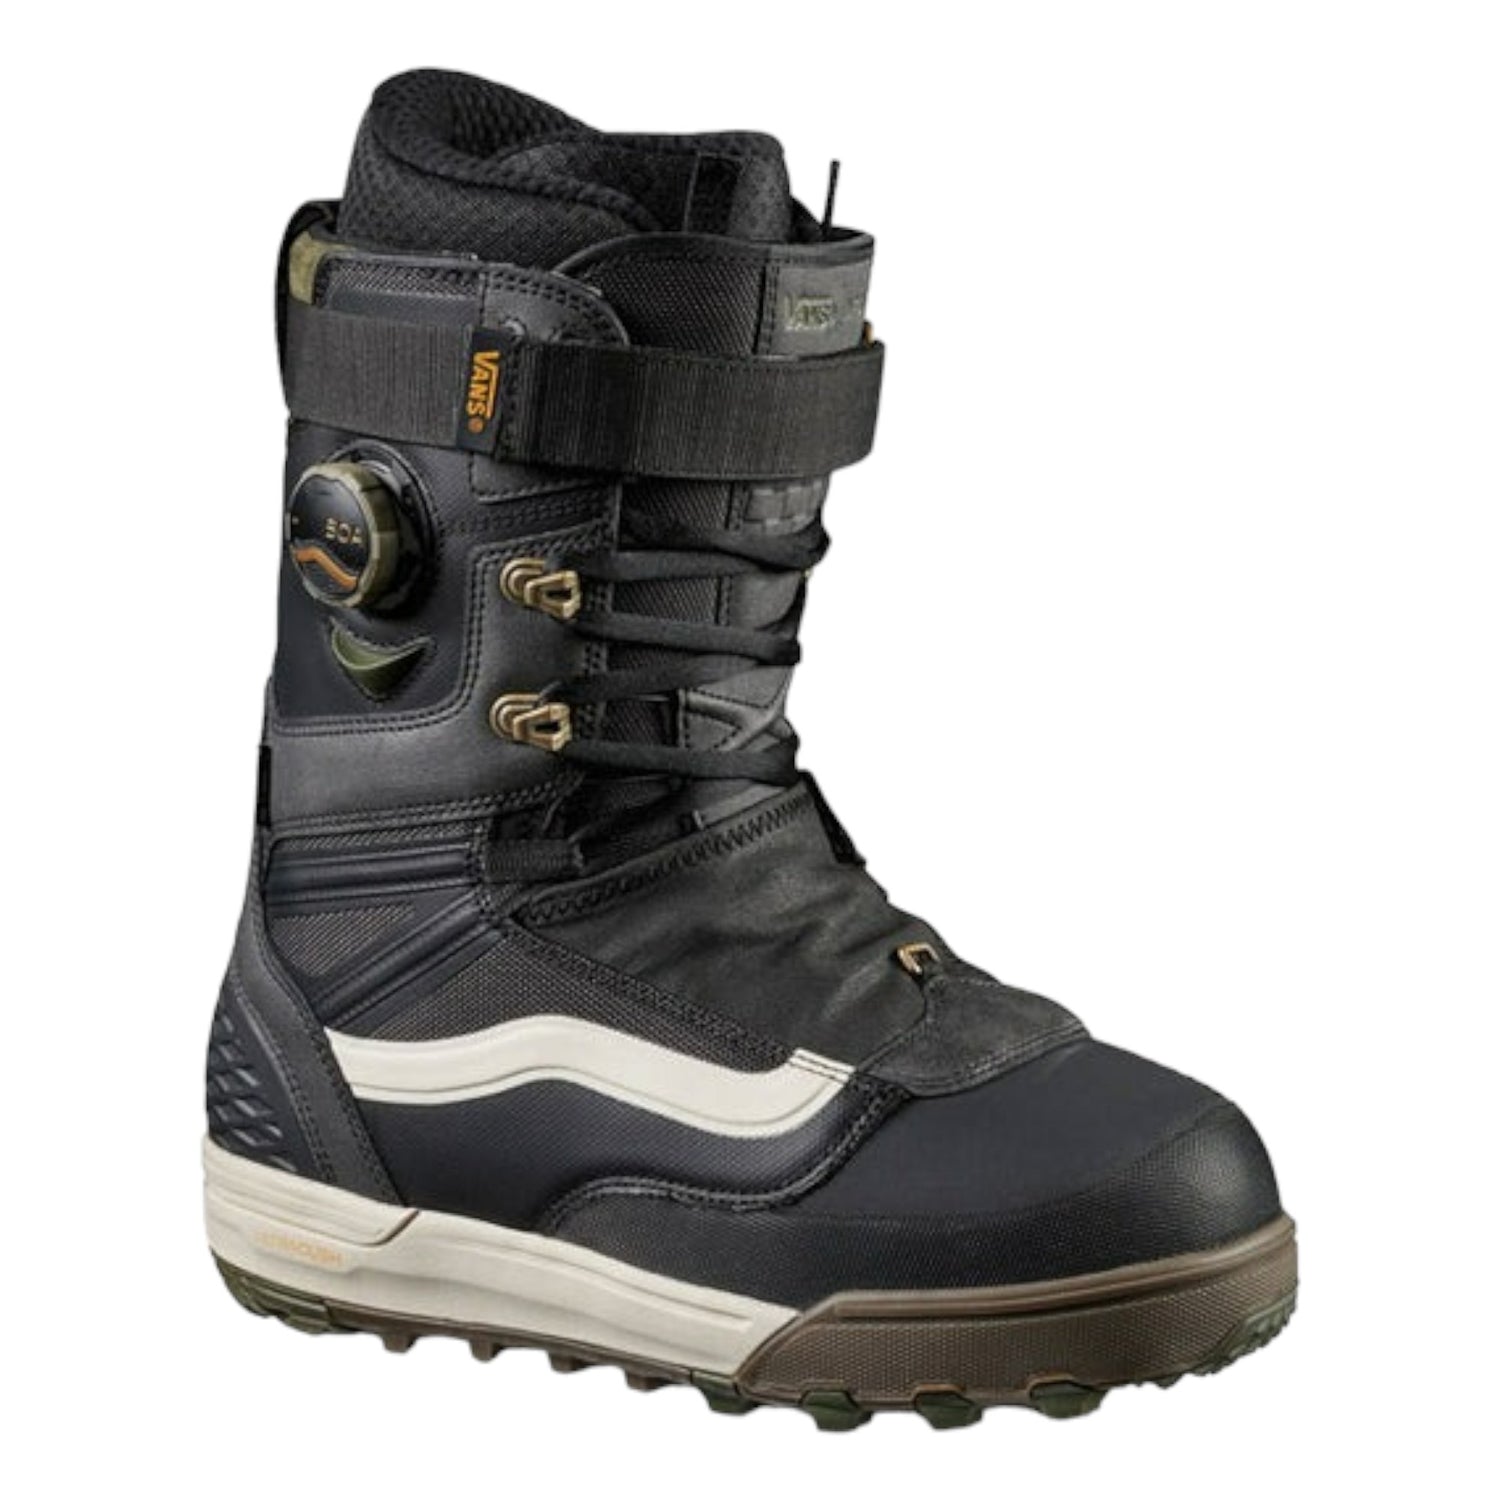 Infuse Men Snowboard Boots